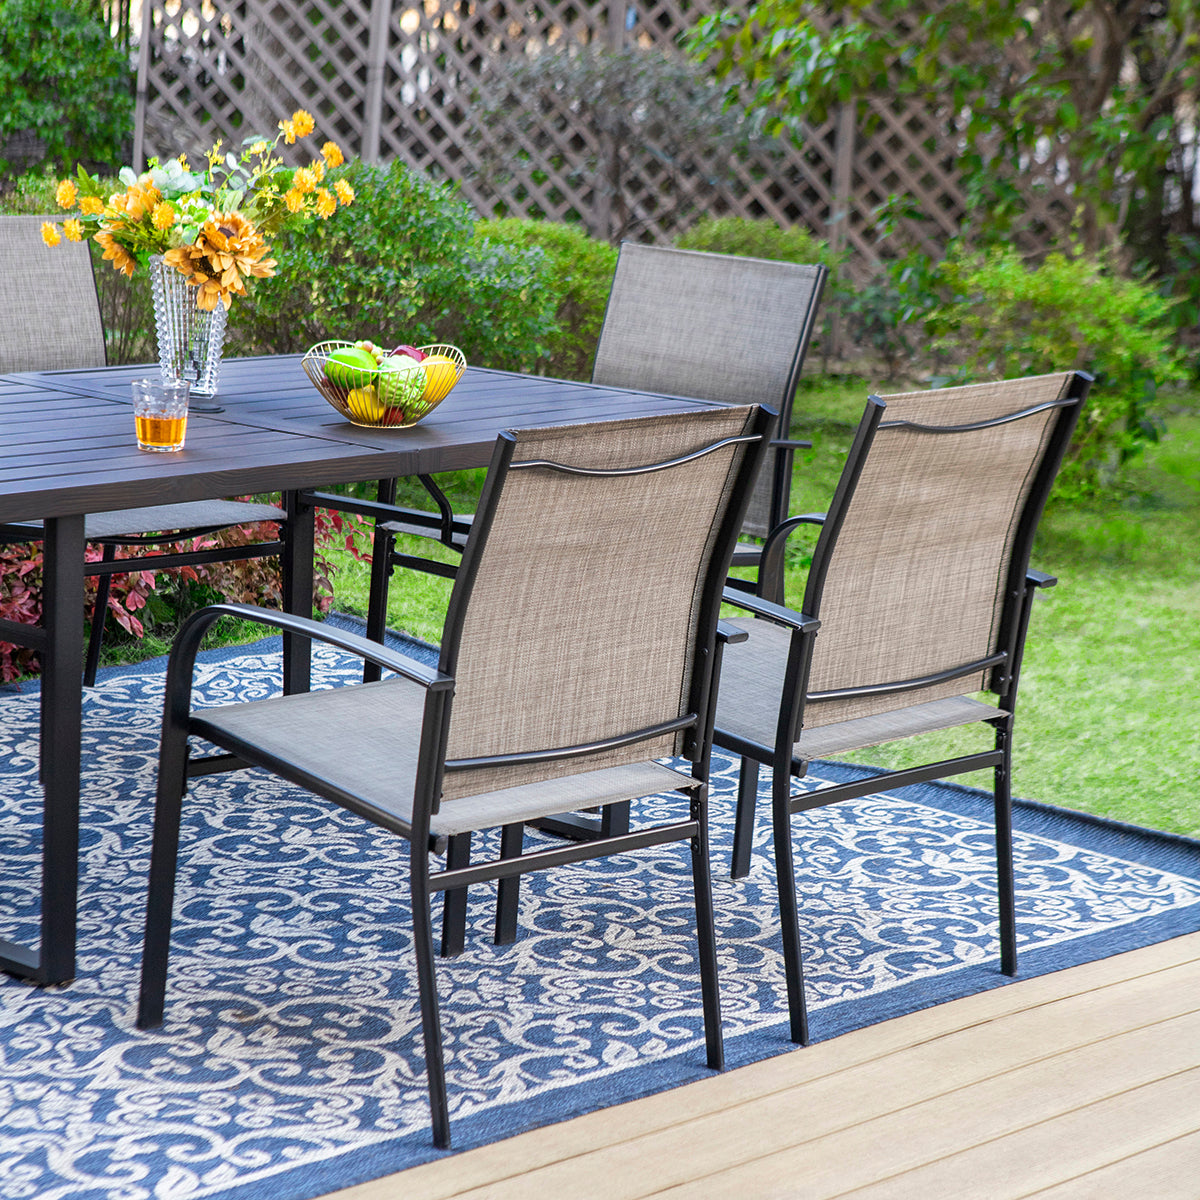 Sophia & William 7-Piece Patio Dining Set Printed Wood-grain Table & Light Textilene Fixed Chairs